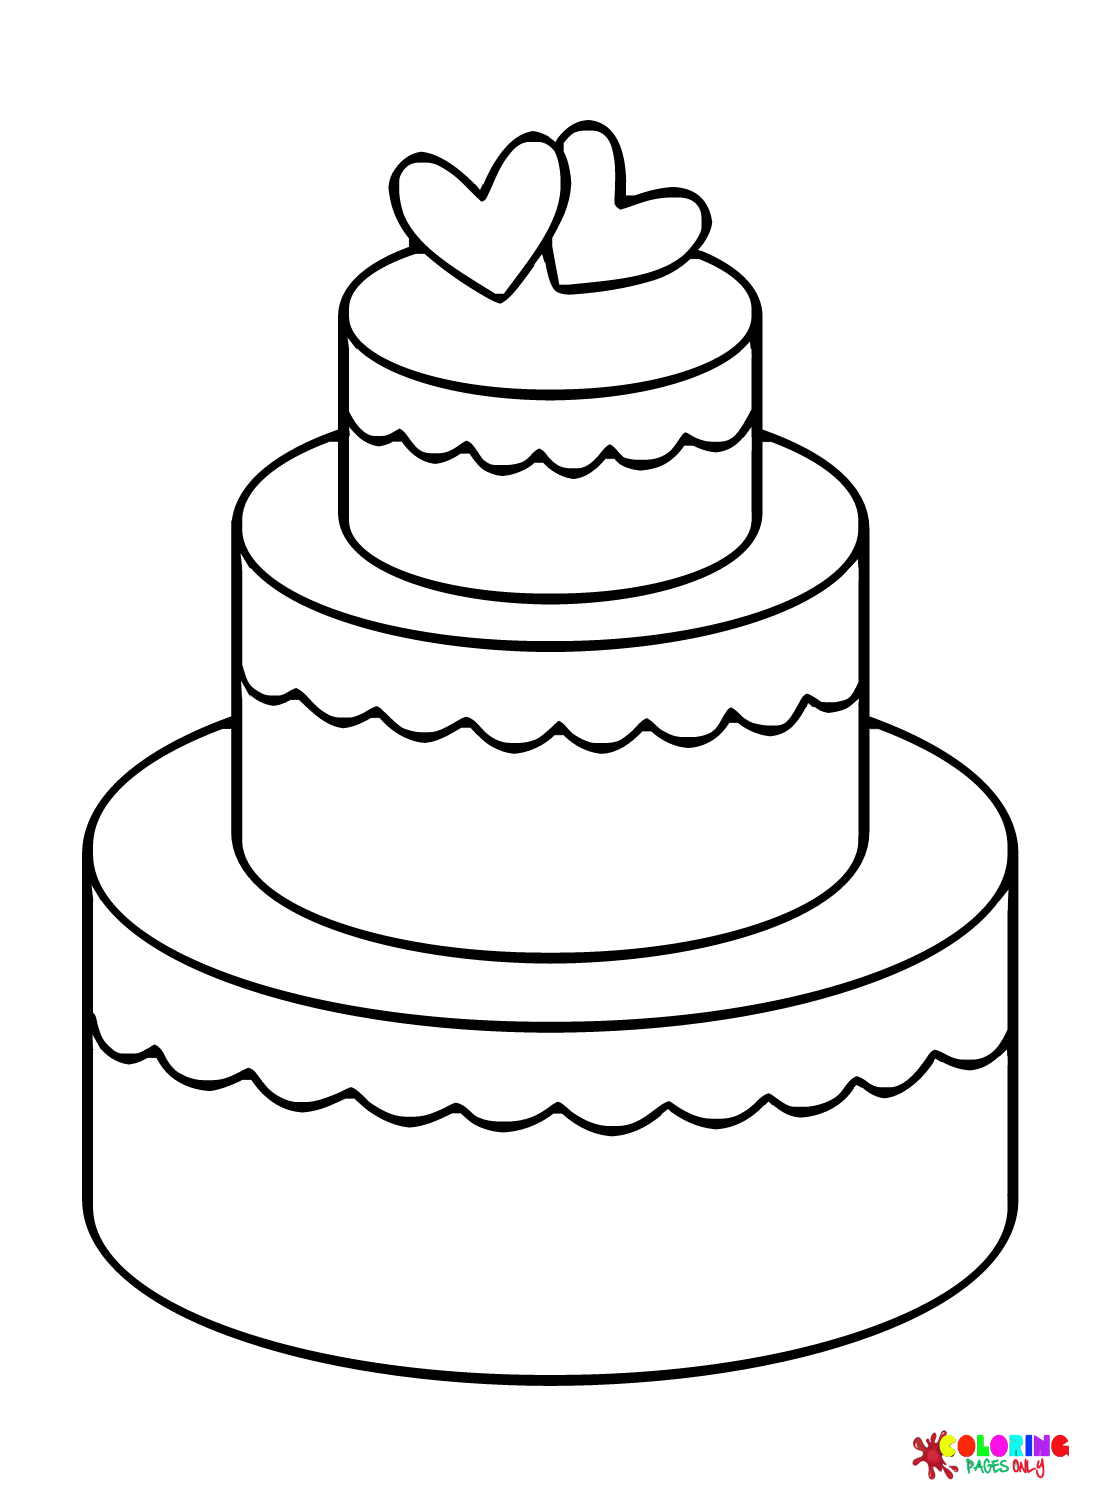 Drawing of Birthday Cake coloring page - Download, Print or Color Online  for Free